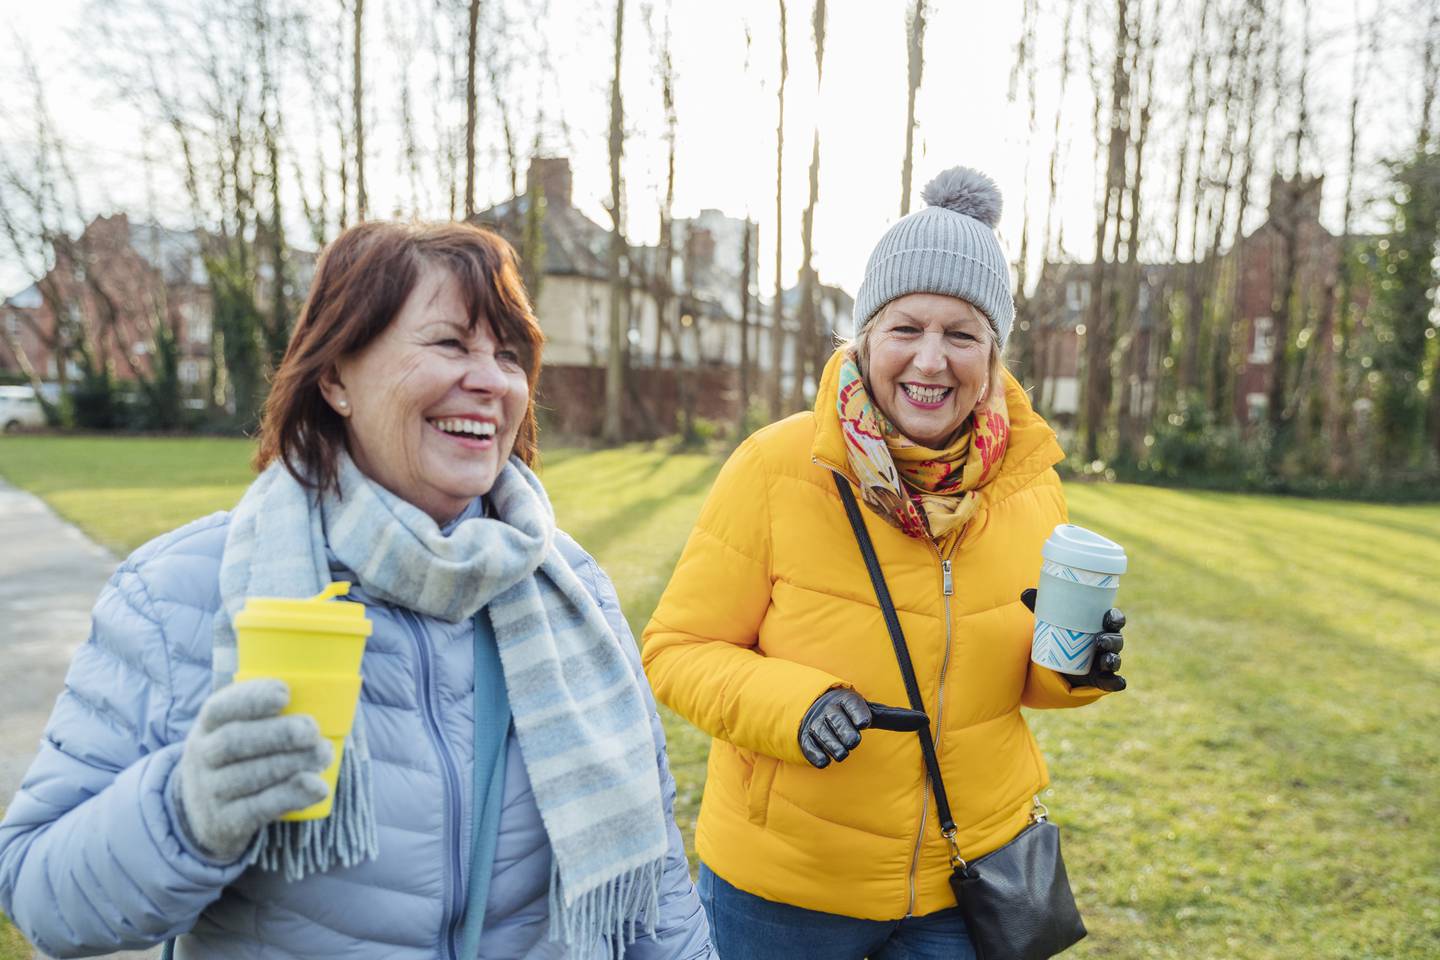 walking coffee outdoor fitness friends. Photograph: iStock